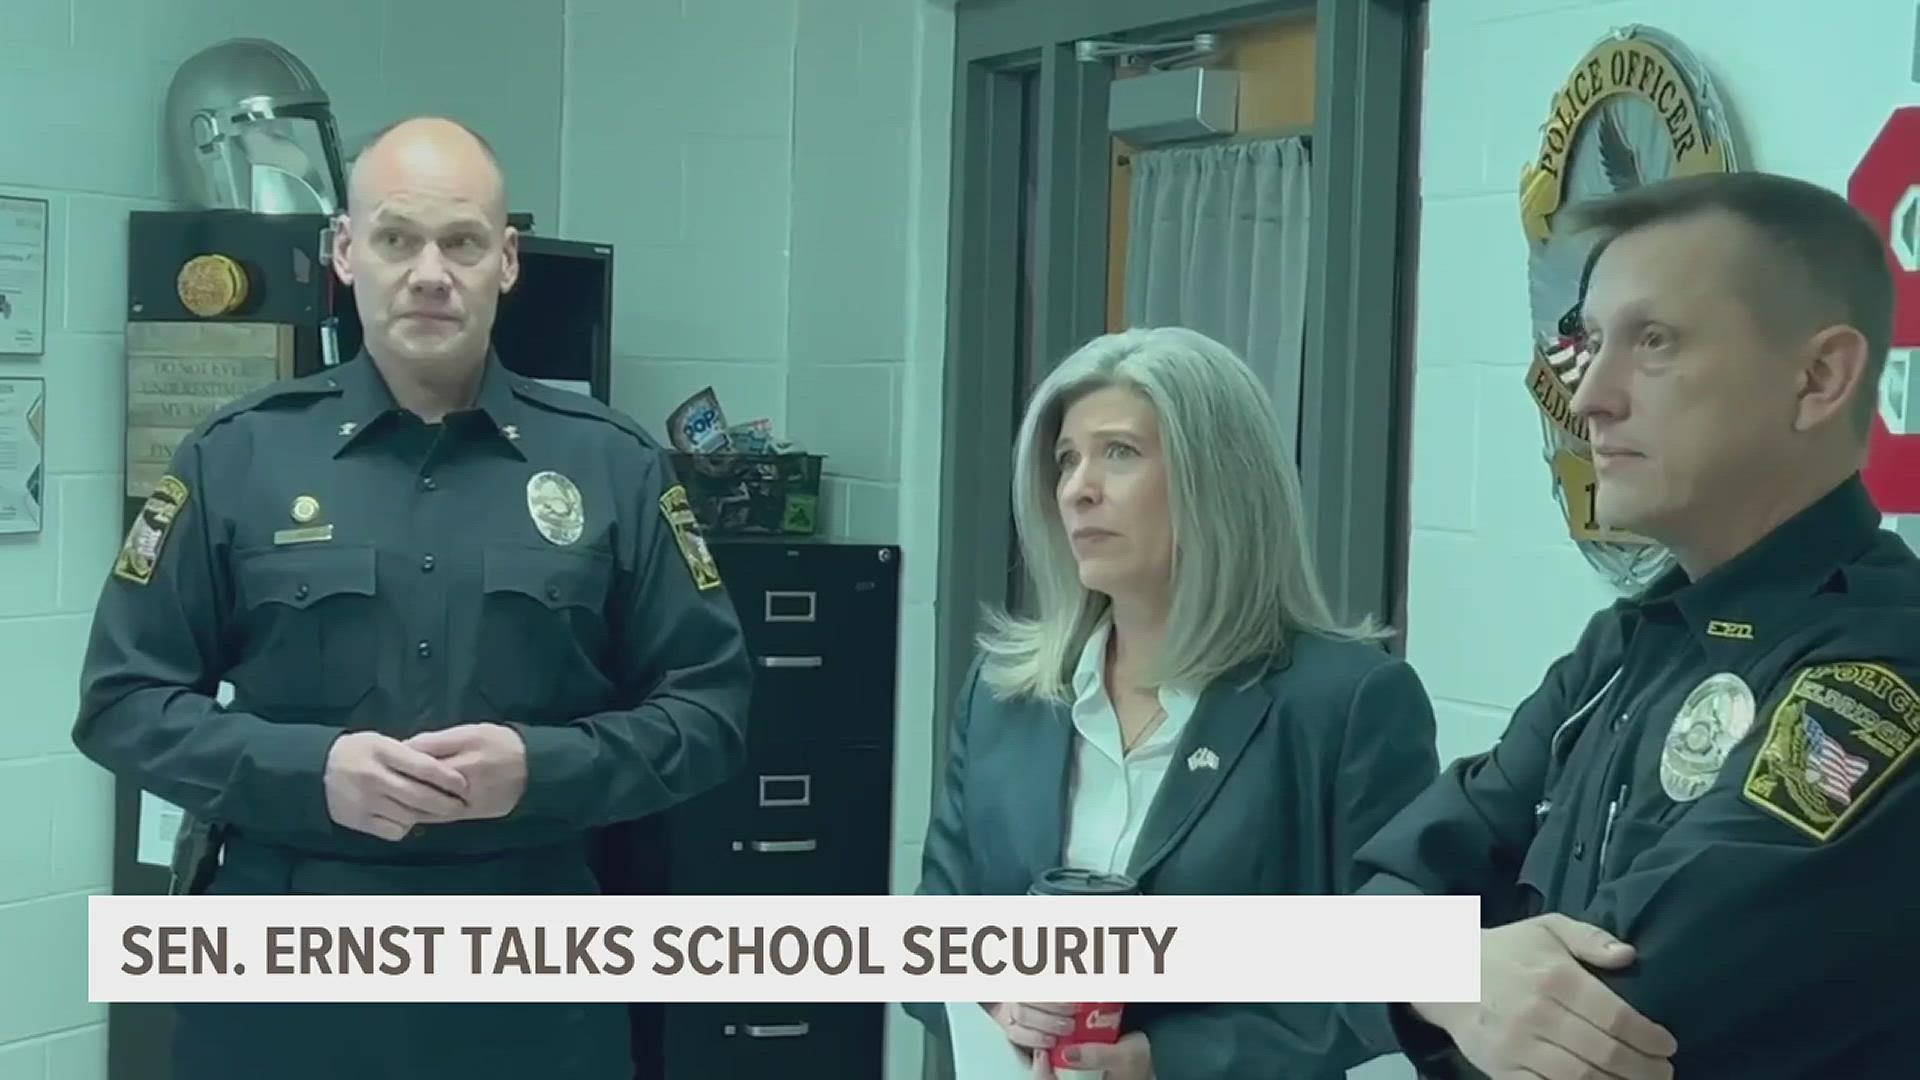 Eldridge police and school officials said that more money is needed to boost security, and Sen. Ernst said that federal funding is there to help.